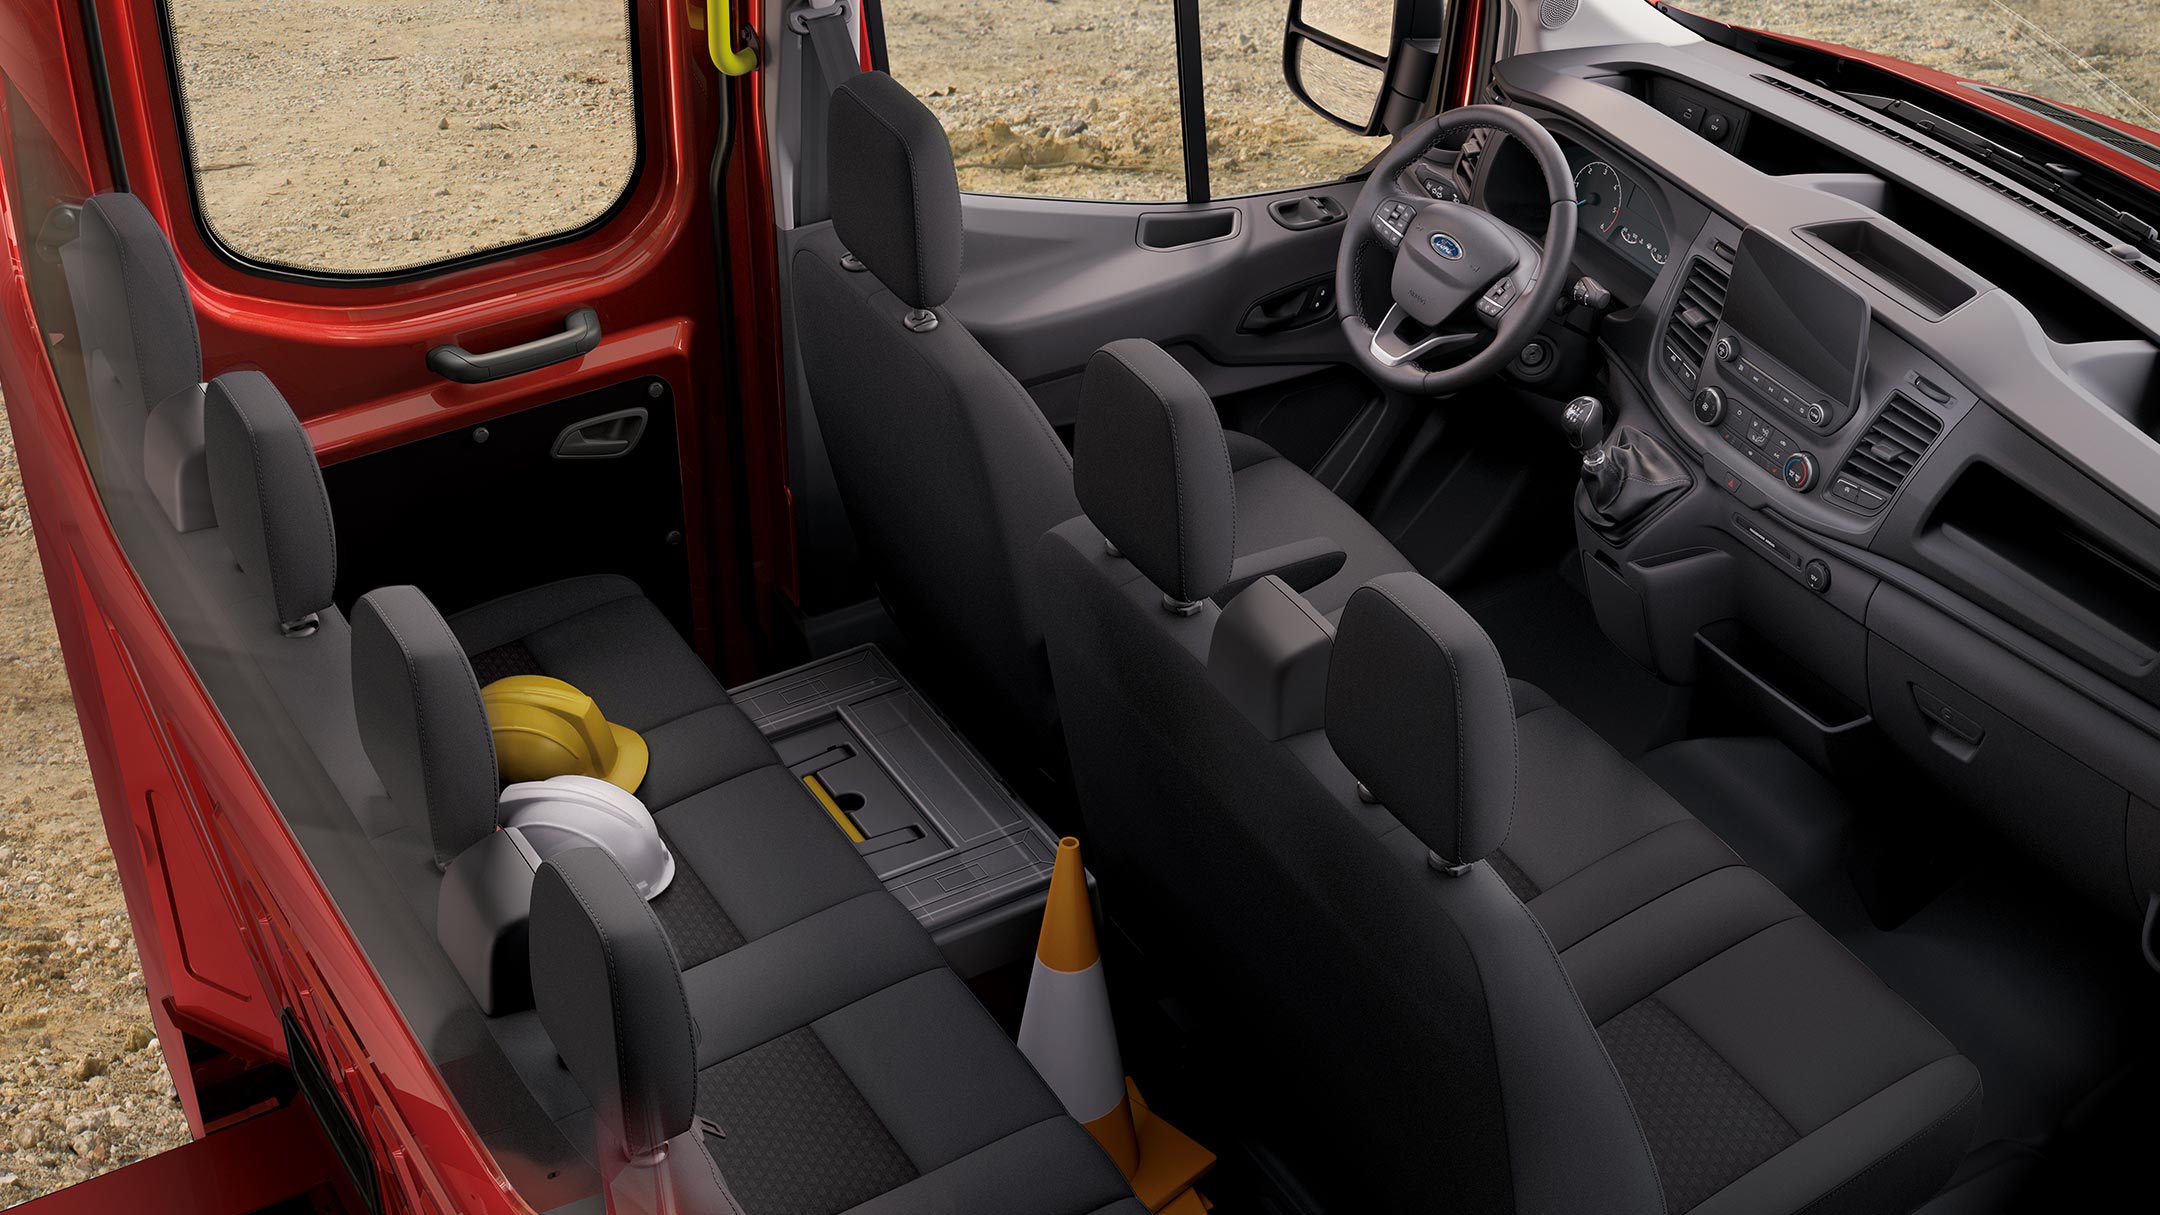 New Ford Transit Chassis Cab interior cabin view